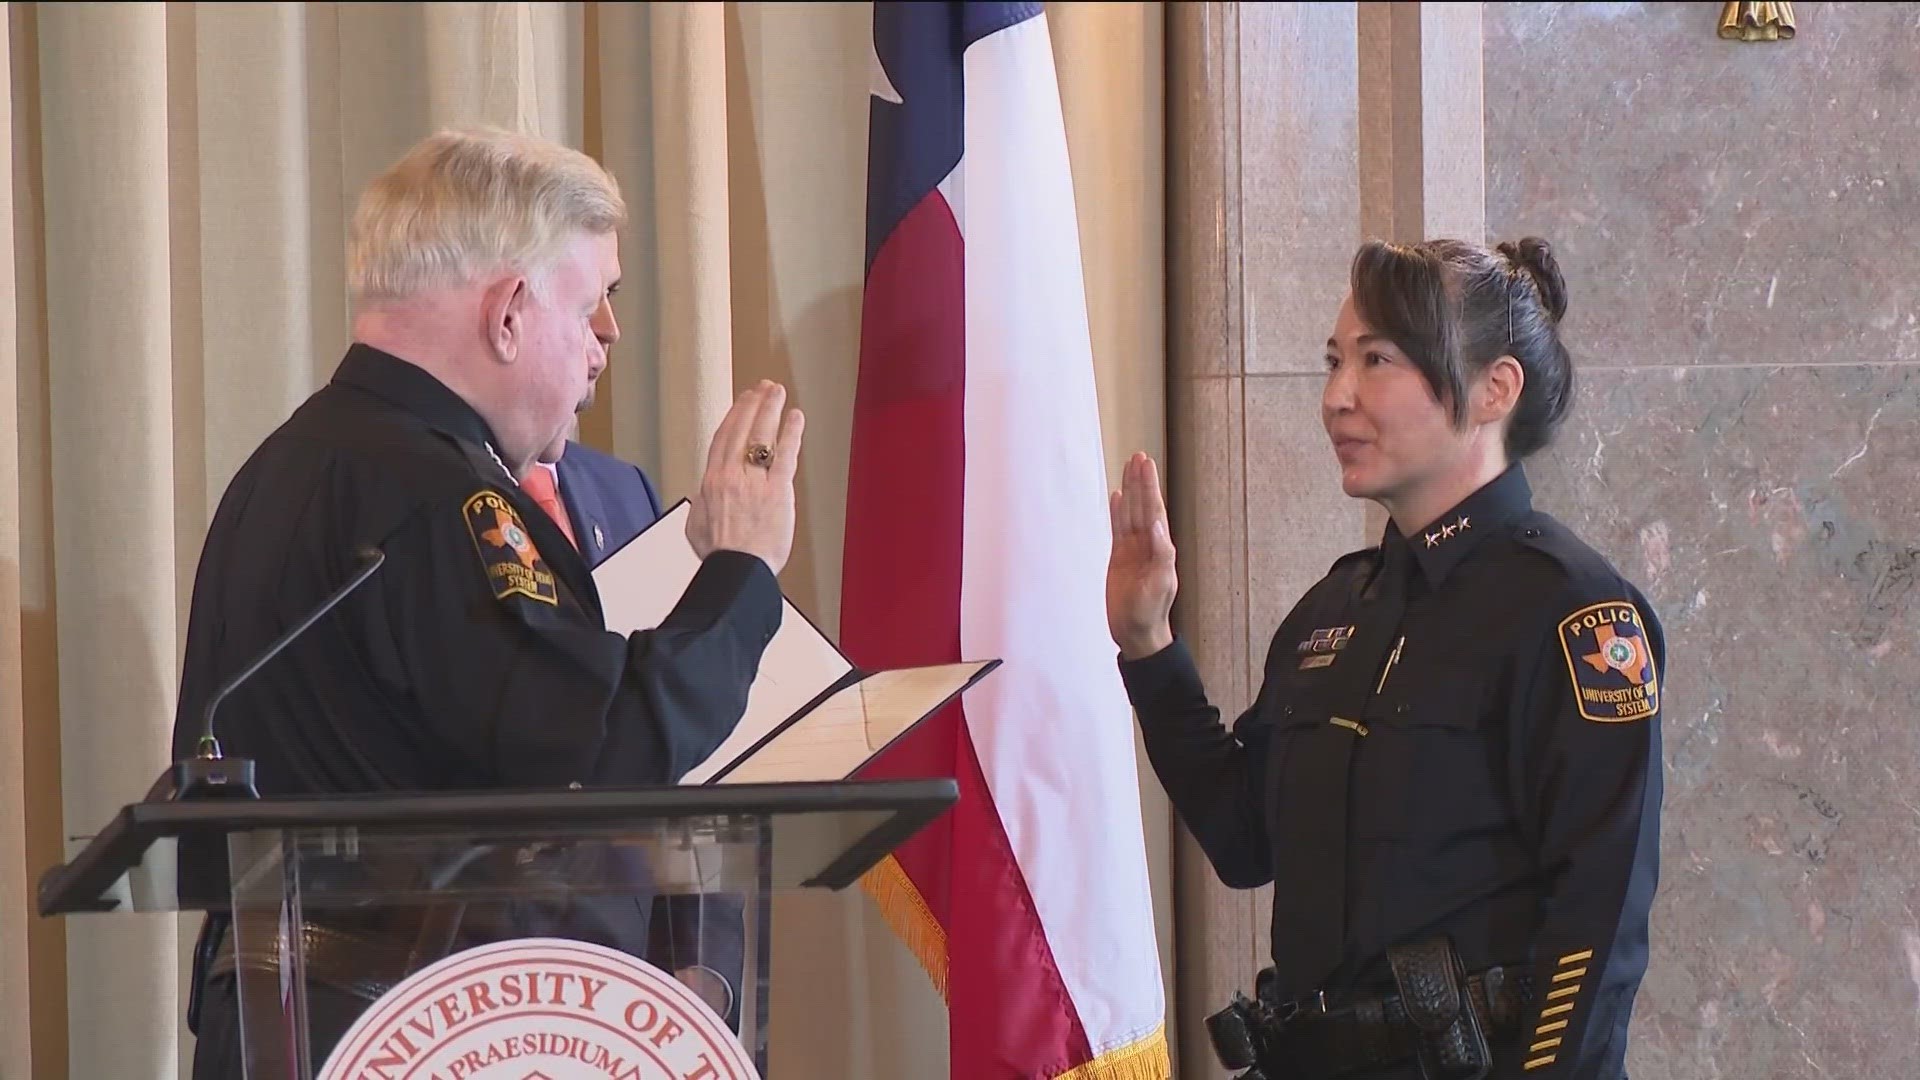 Chief Eve Stephens took the oath of office on Wednesday.